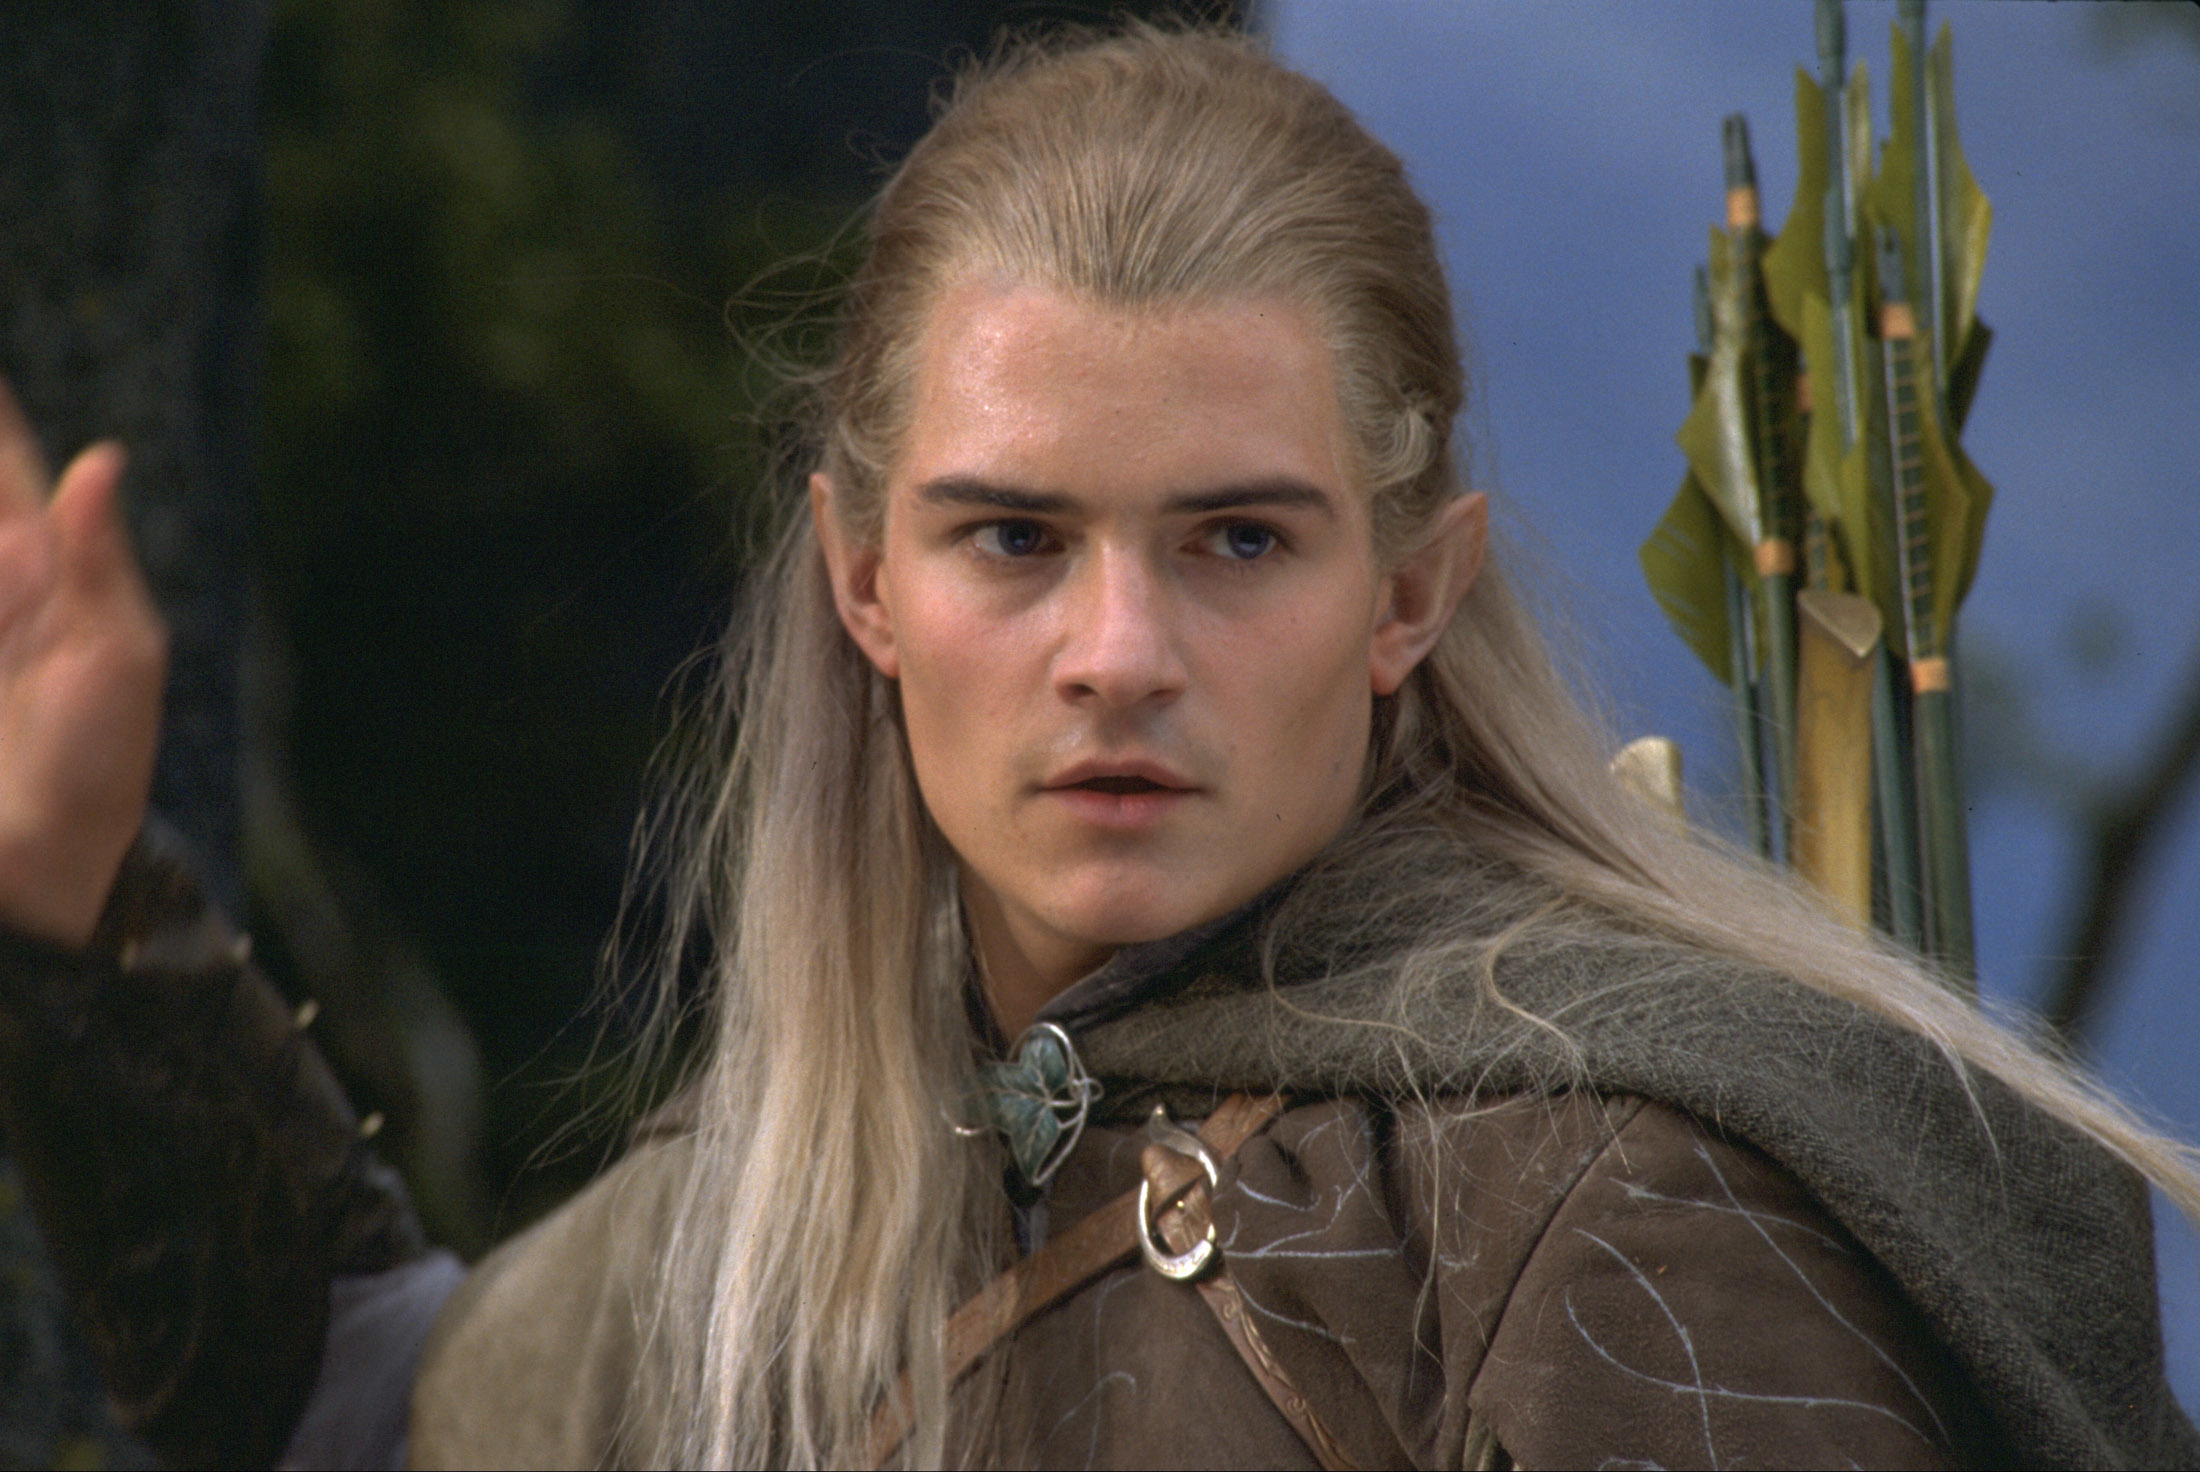 Legolas from Lord of the Rings, depicted with long blond hair and elven outfit, holding a bow